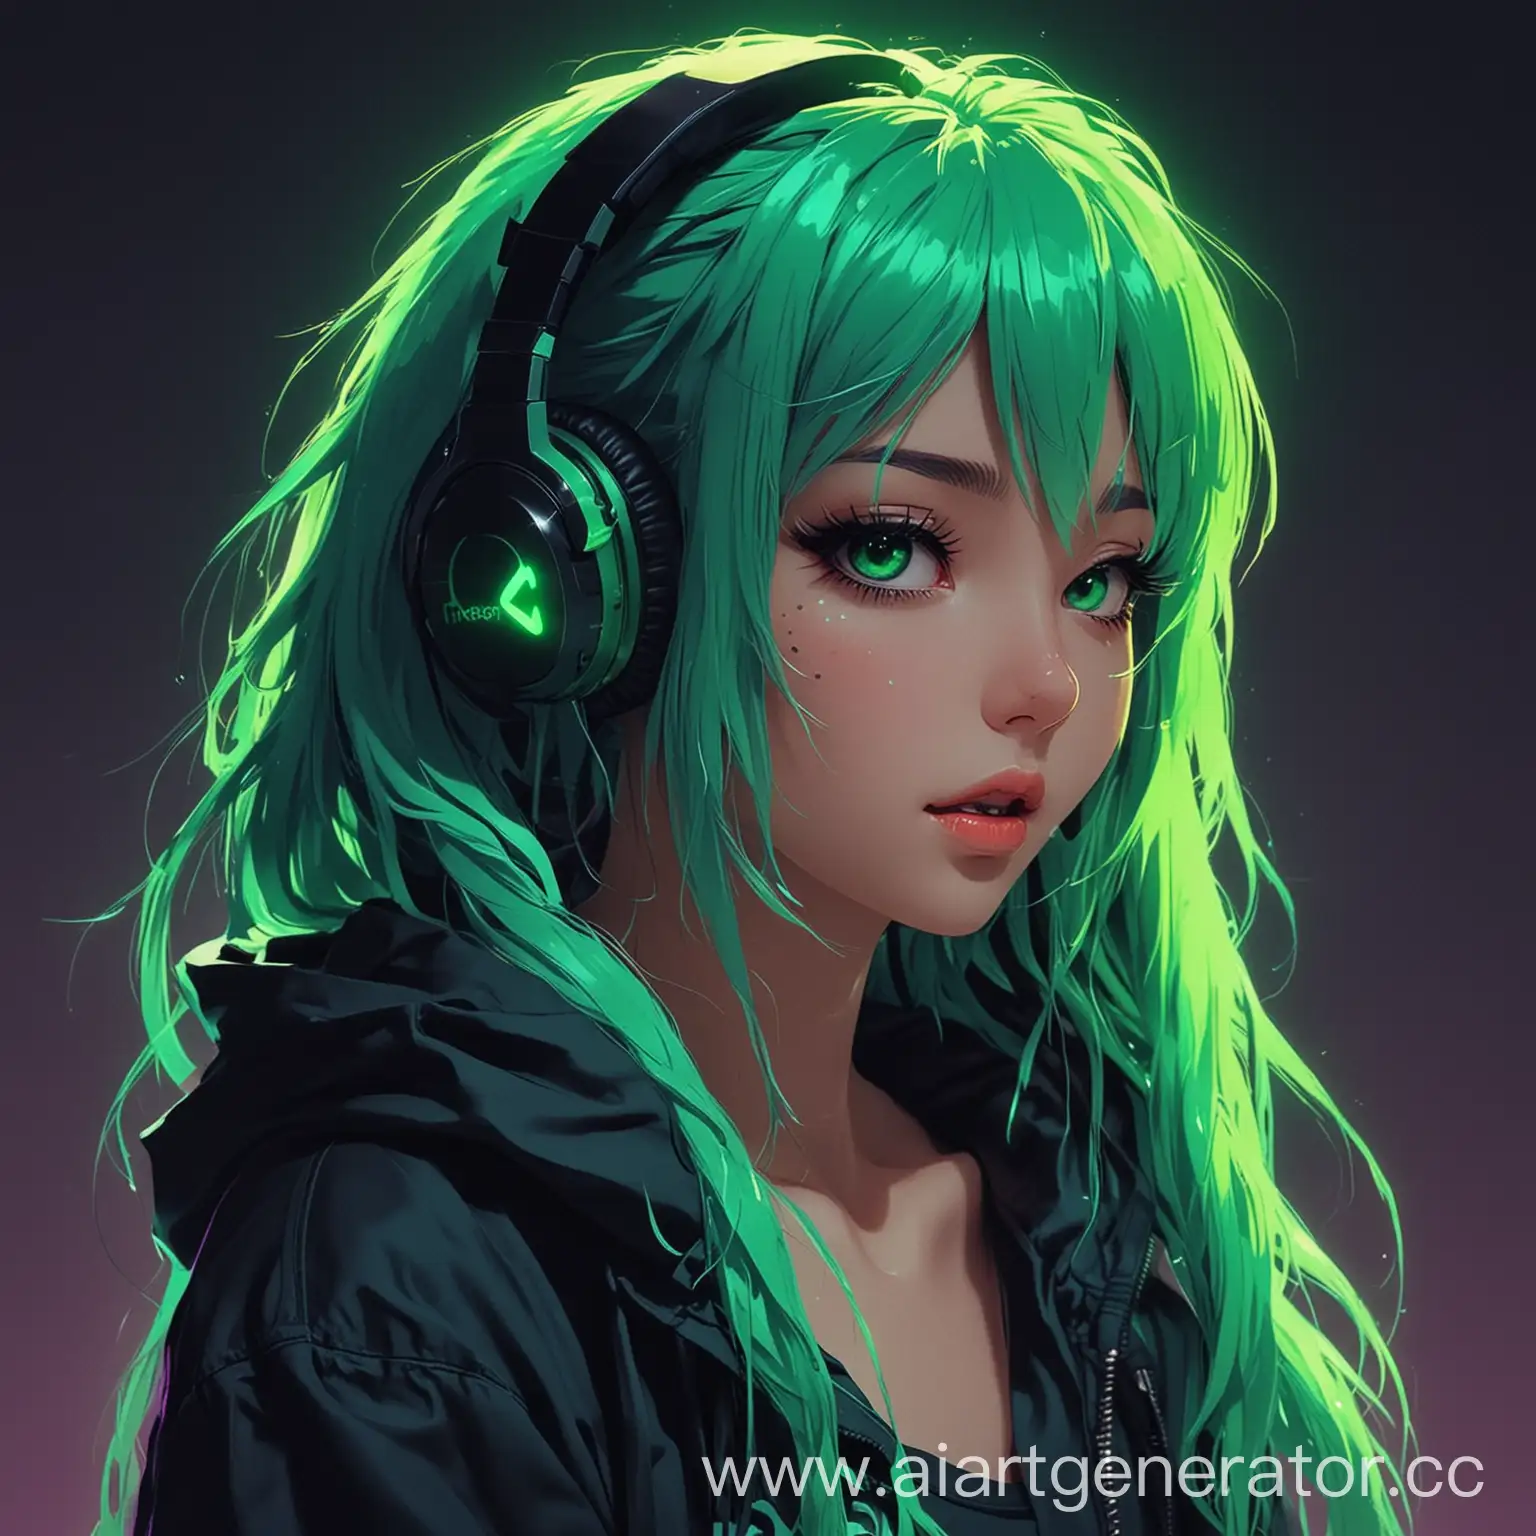 anime girl listen music this is in neon style and green toxic color